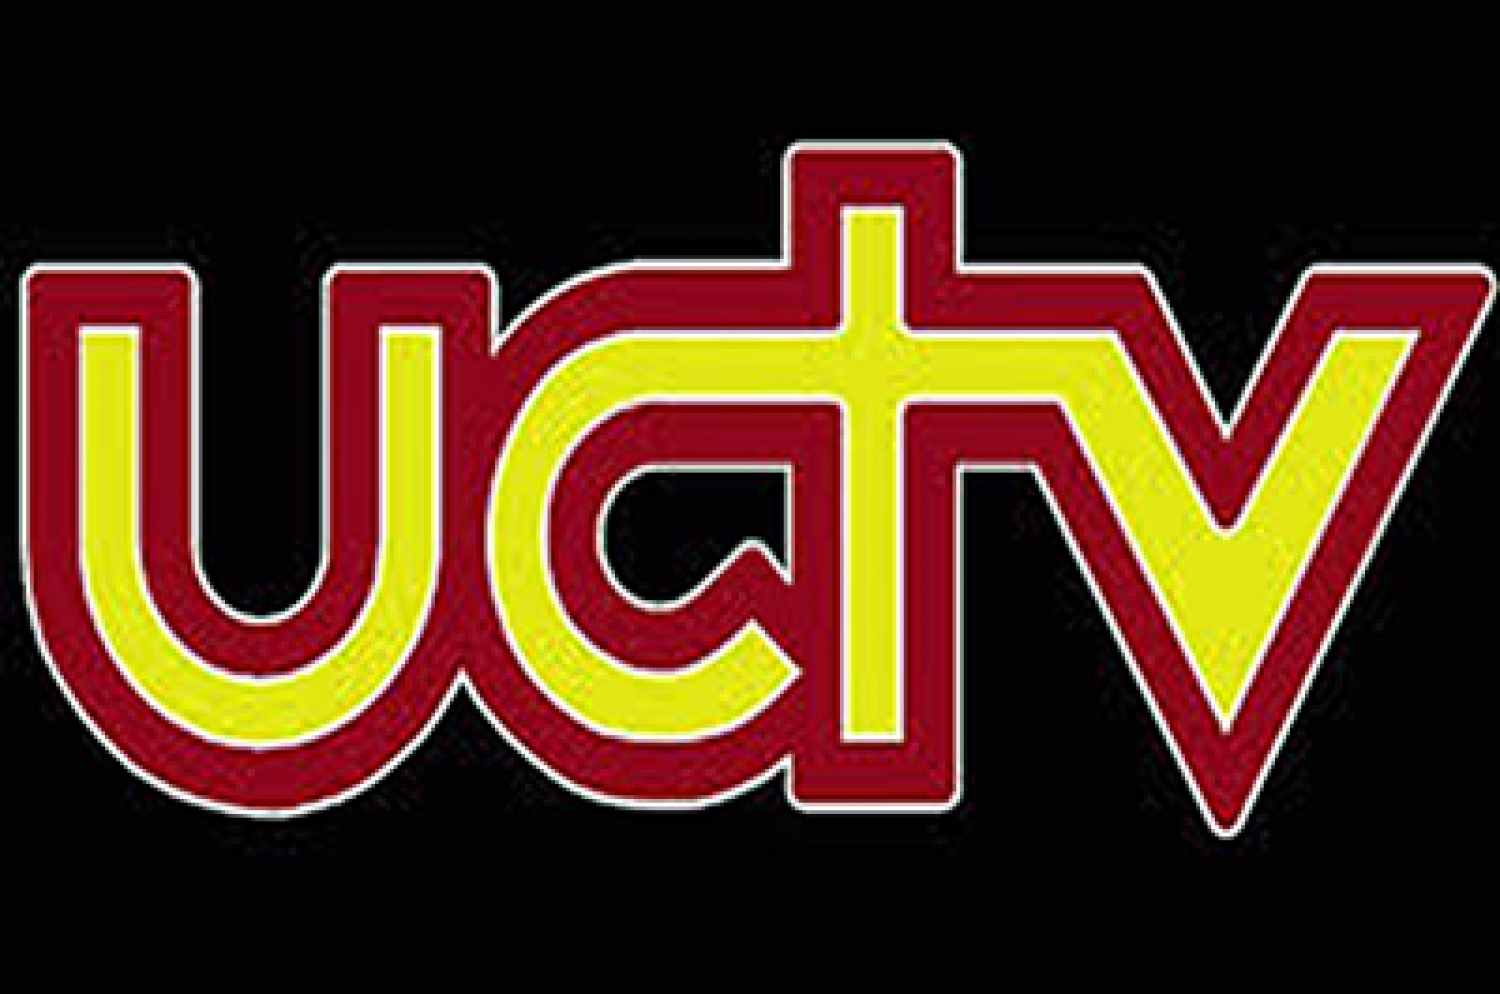 How to access UCTV on GOtv (for Greater Kampala Region)